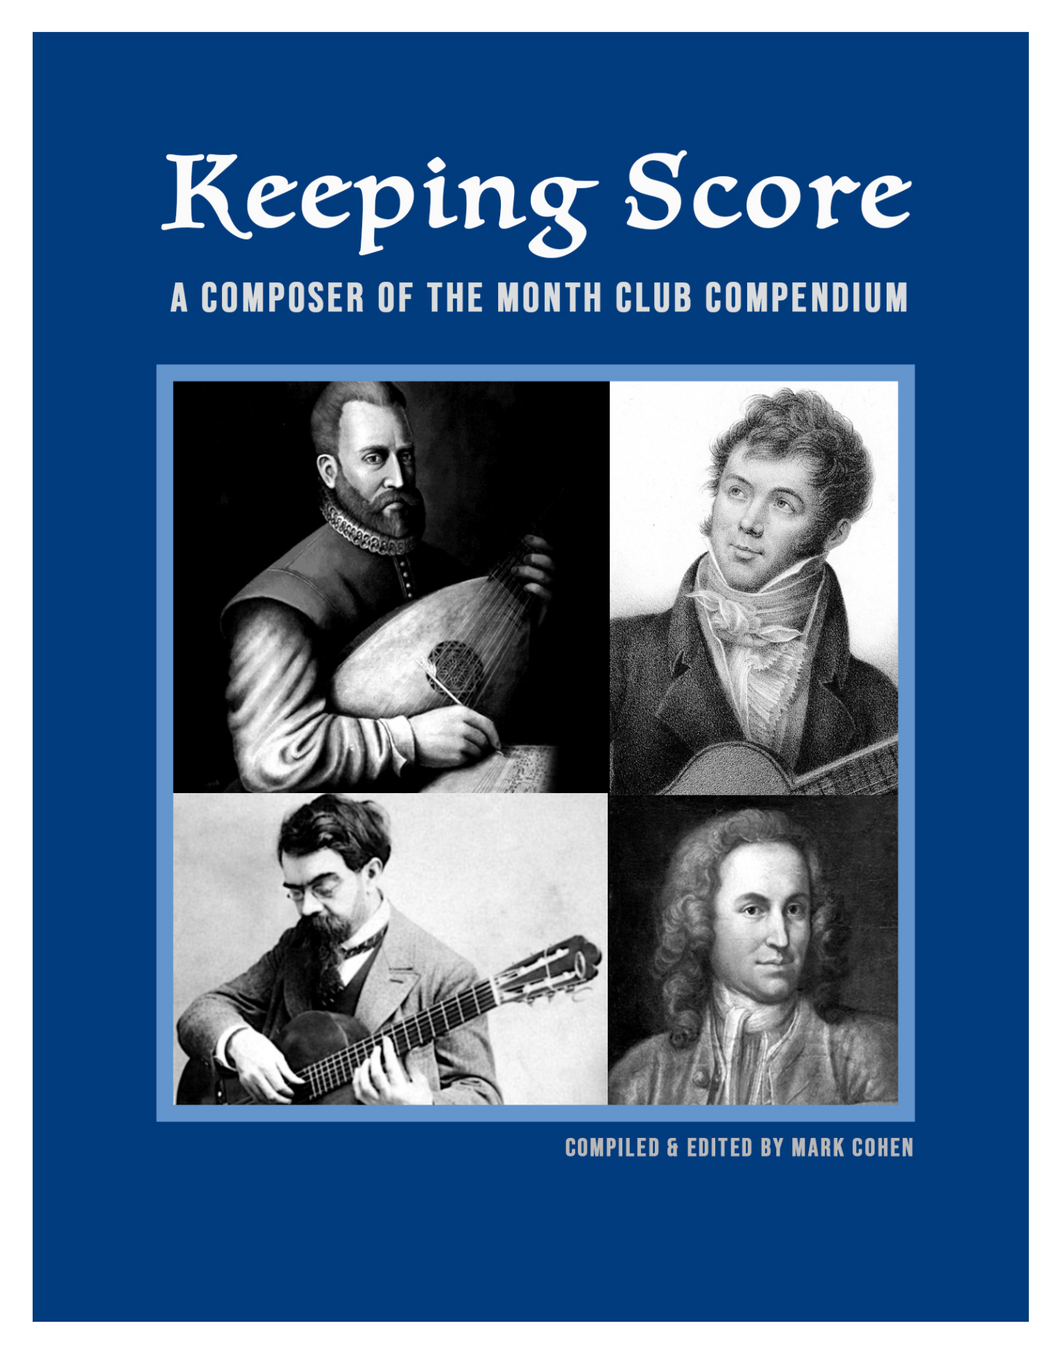 Keeping Score: A Composer of the Month Club Compendium